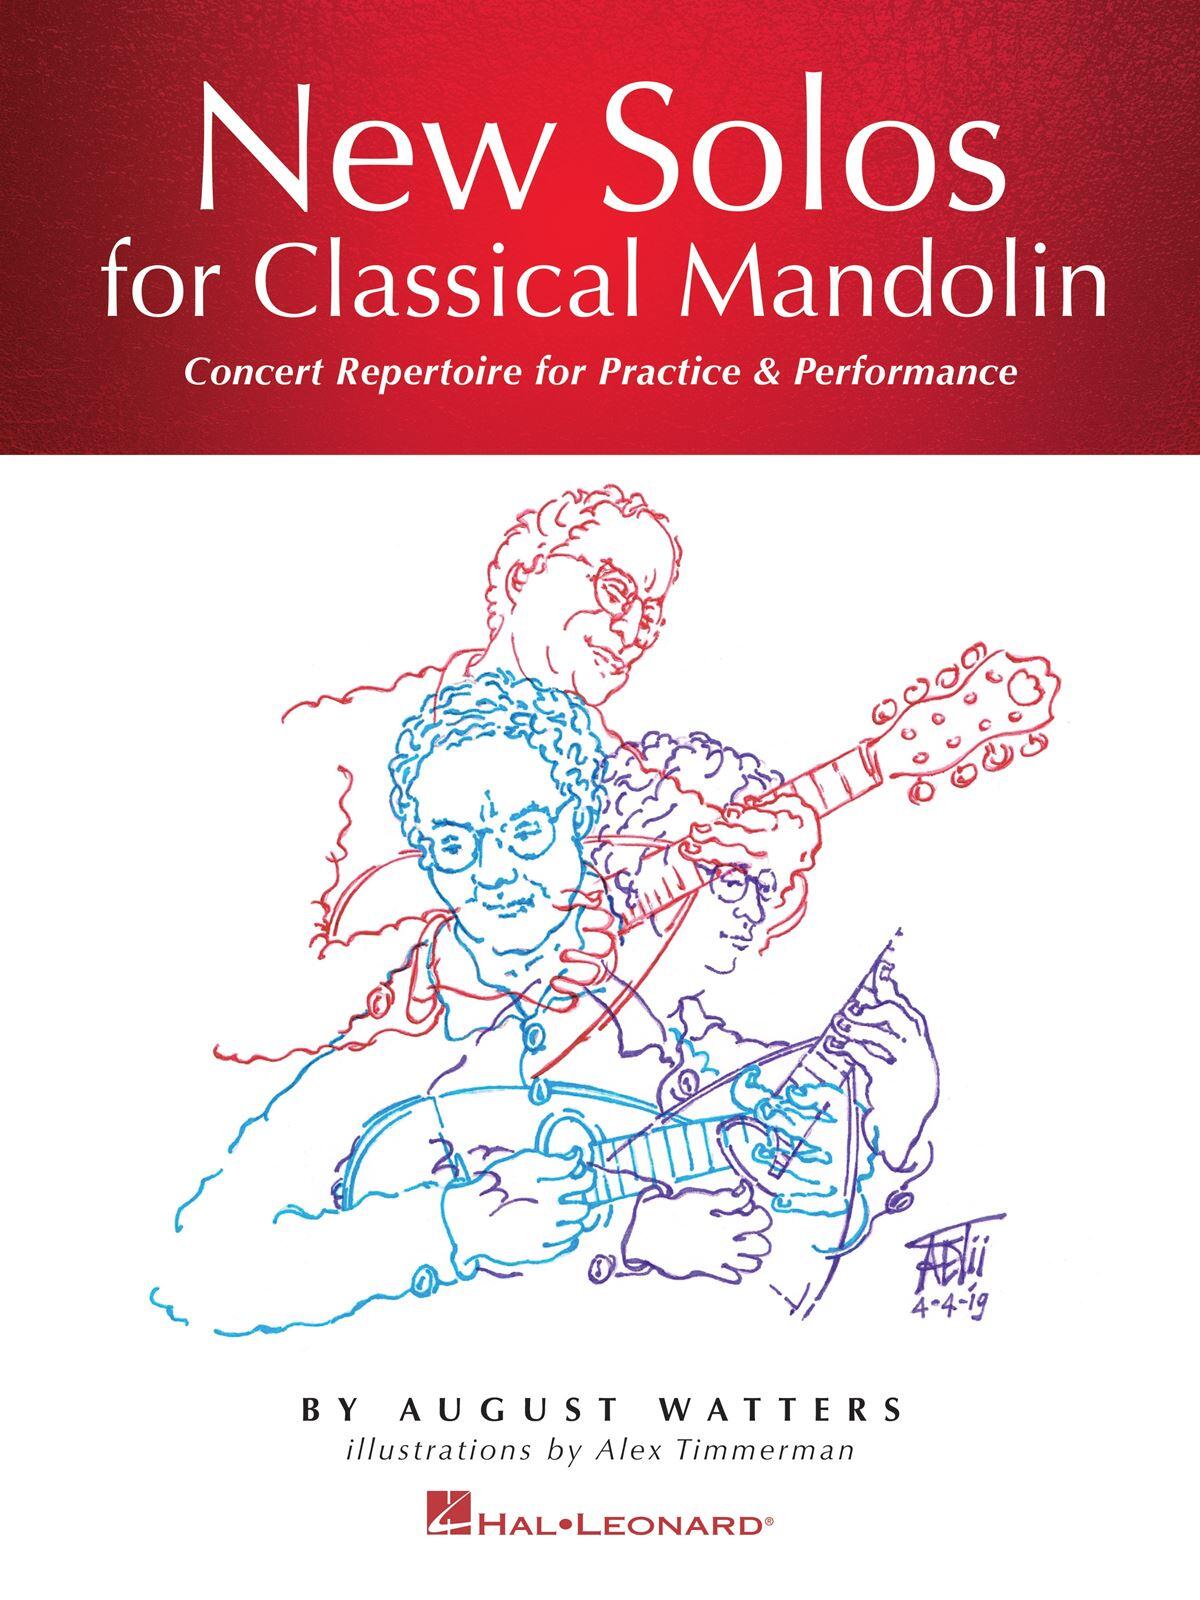 New Solos for Classical Mandolin Concert Repertoire for Practice & Performance : photo 1